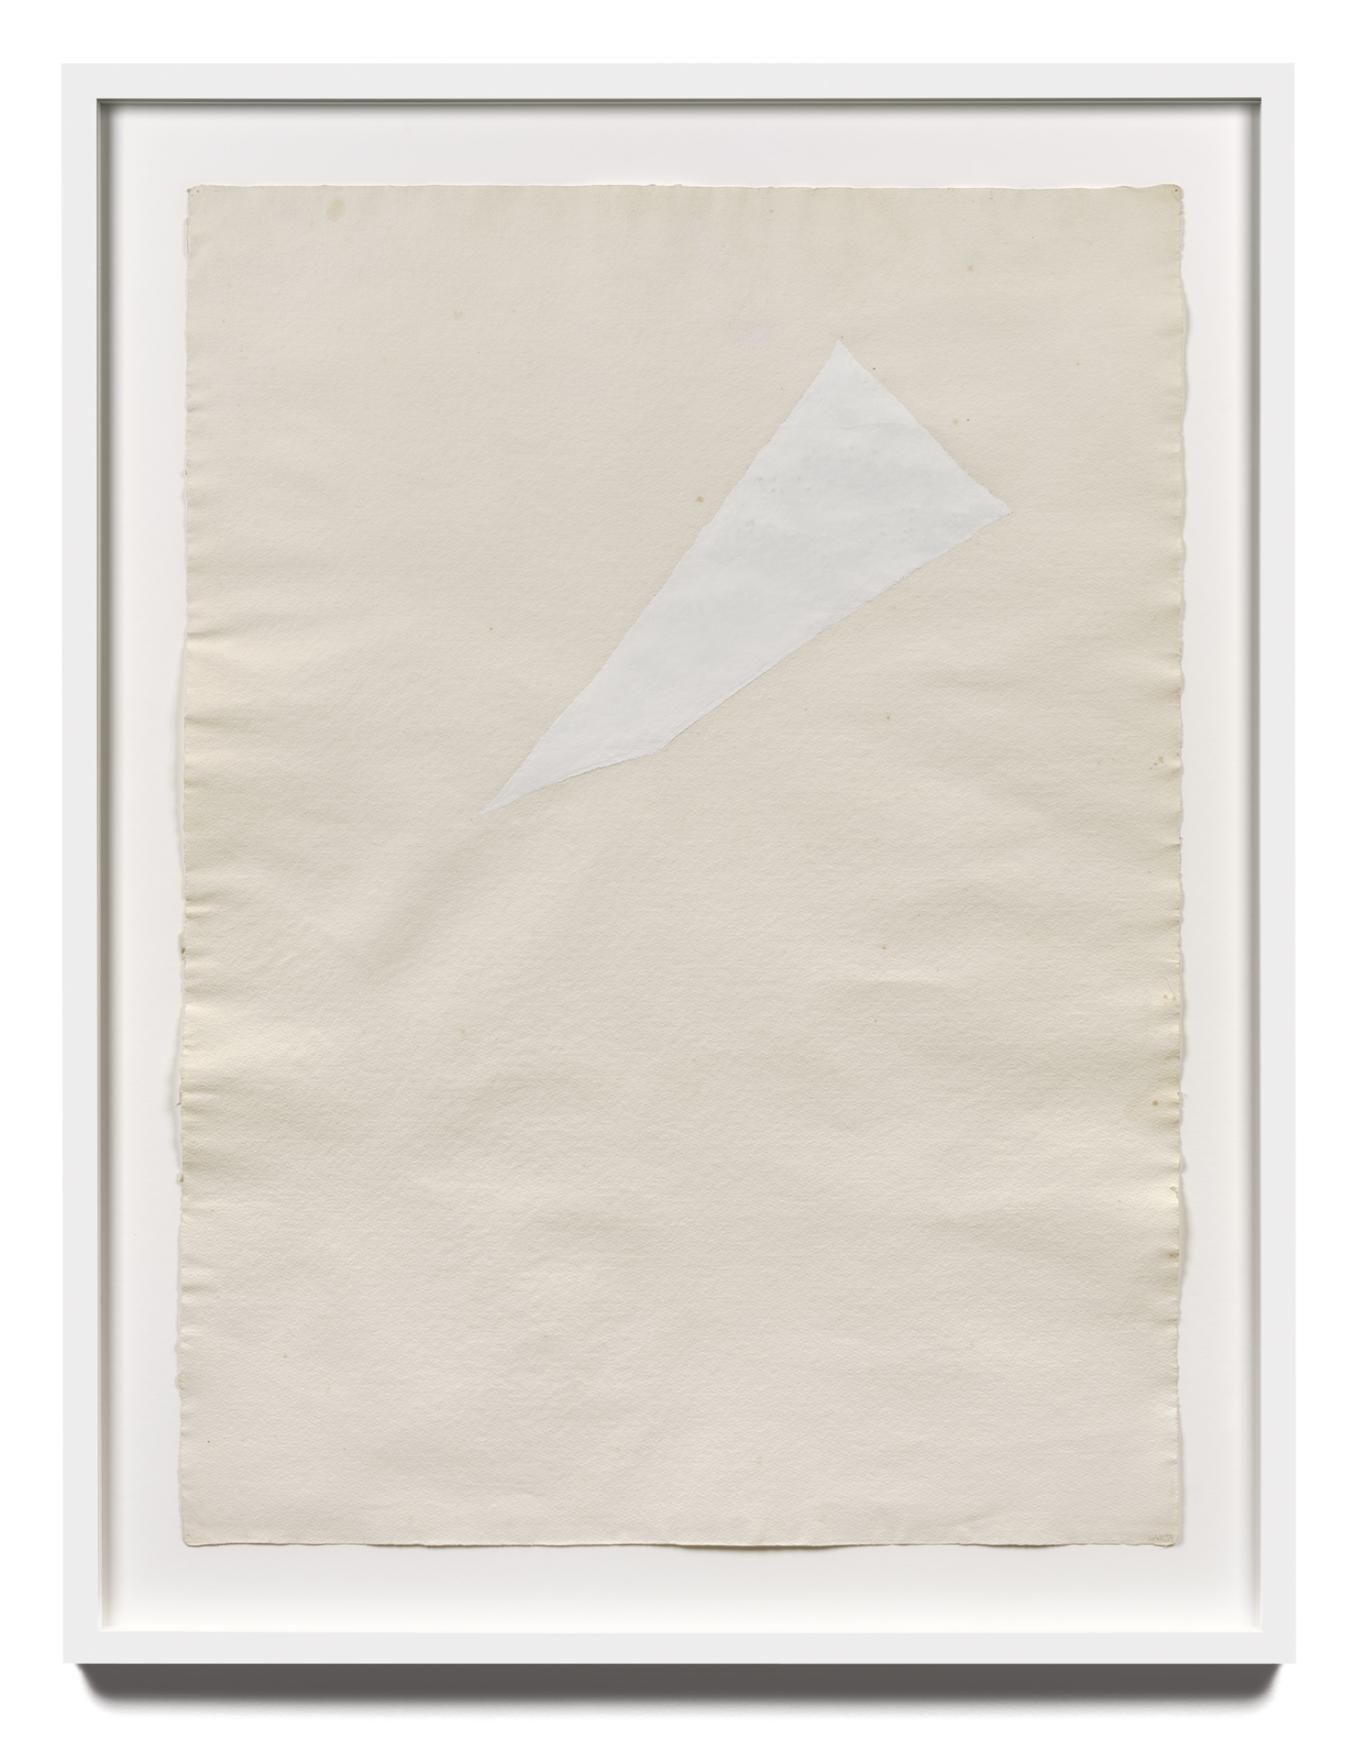 Untitled, Garry Neill Kennedy, acrylic gesso on paper, 1975, colour palette source for I WONDER, Art Metropole, Toronto, 2021